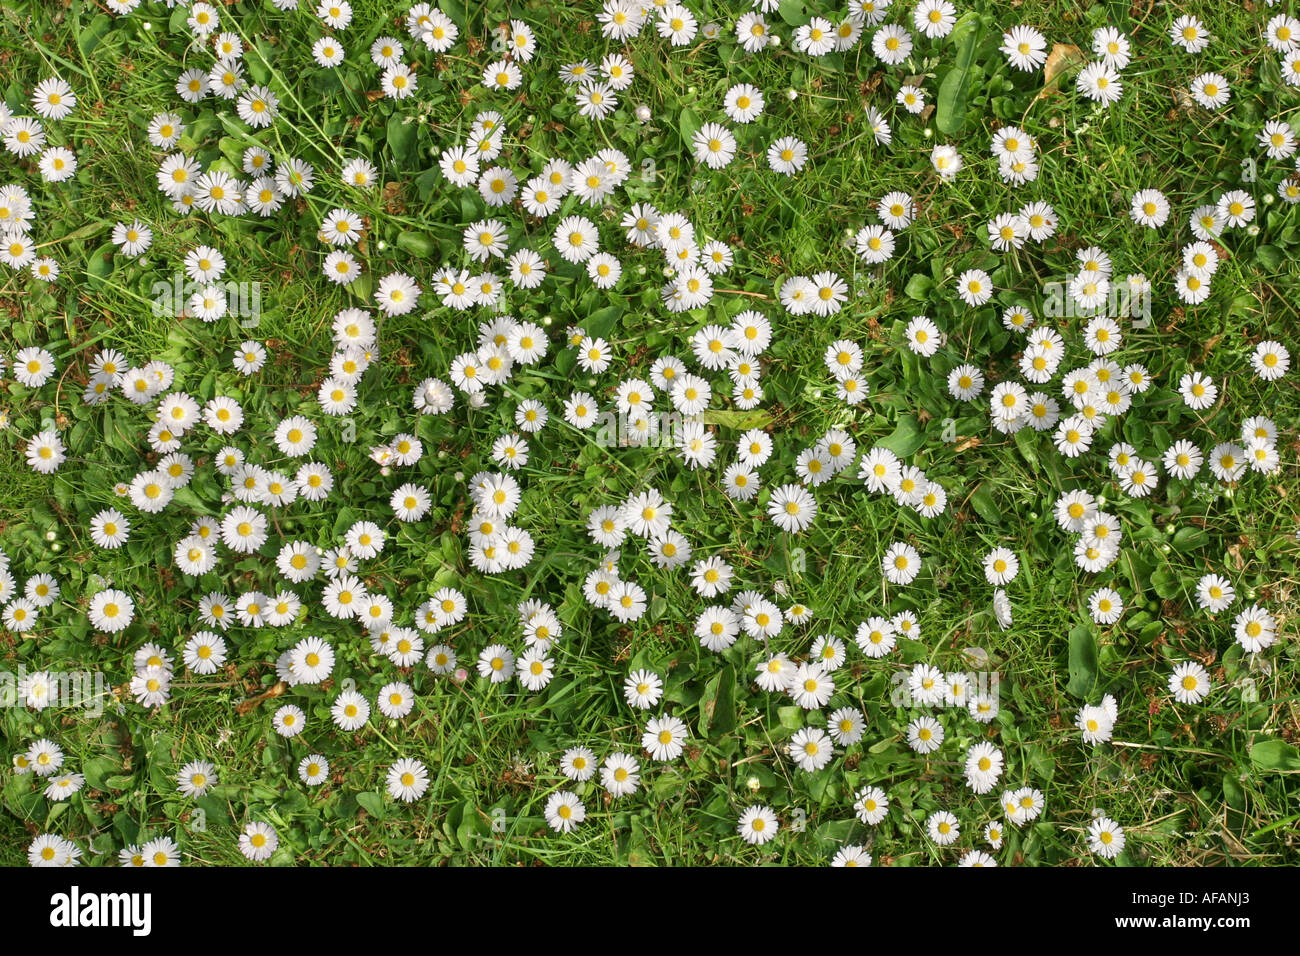 Bellis Perennis flowers growing in a lawn Stock Photo